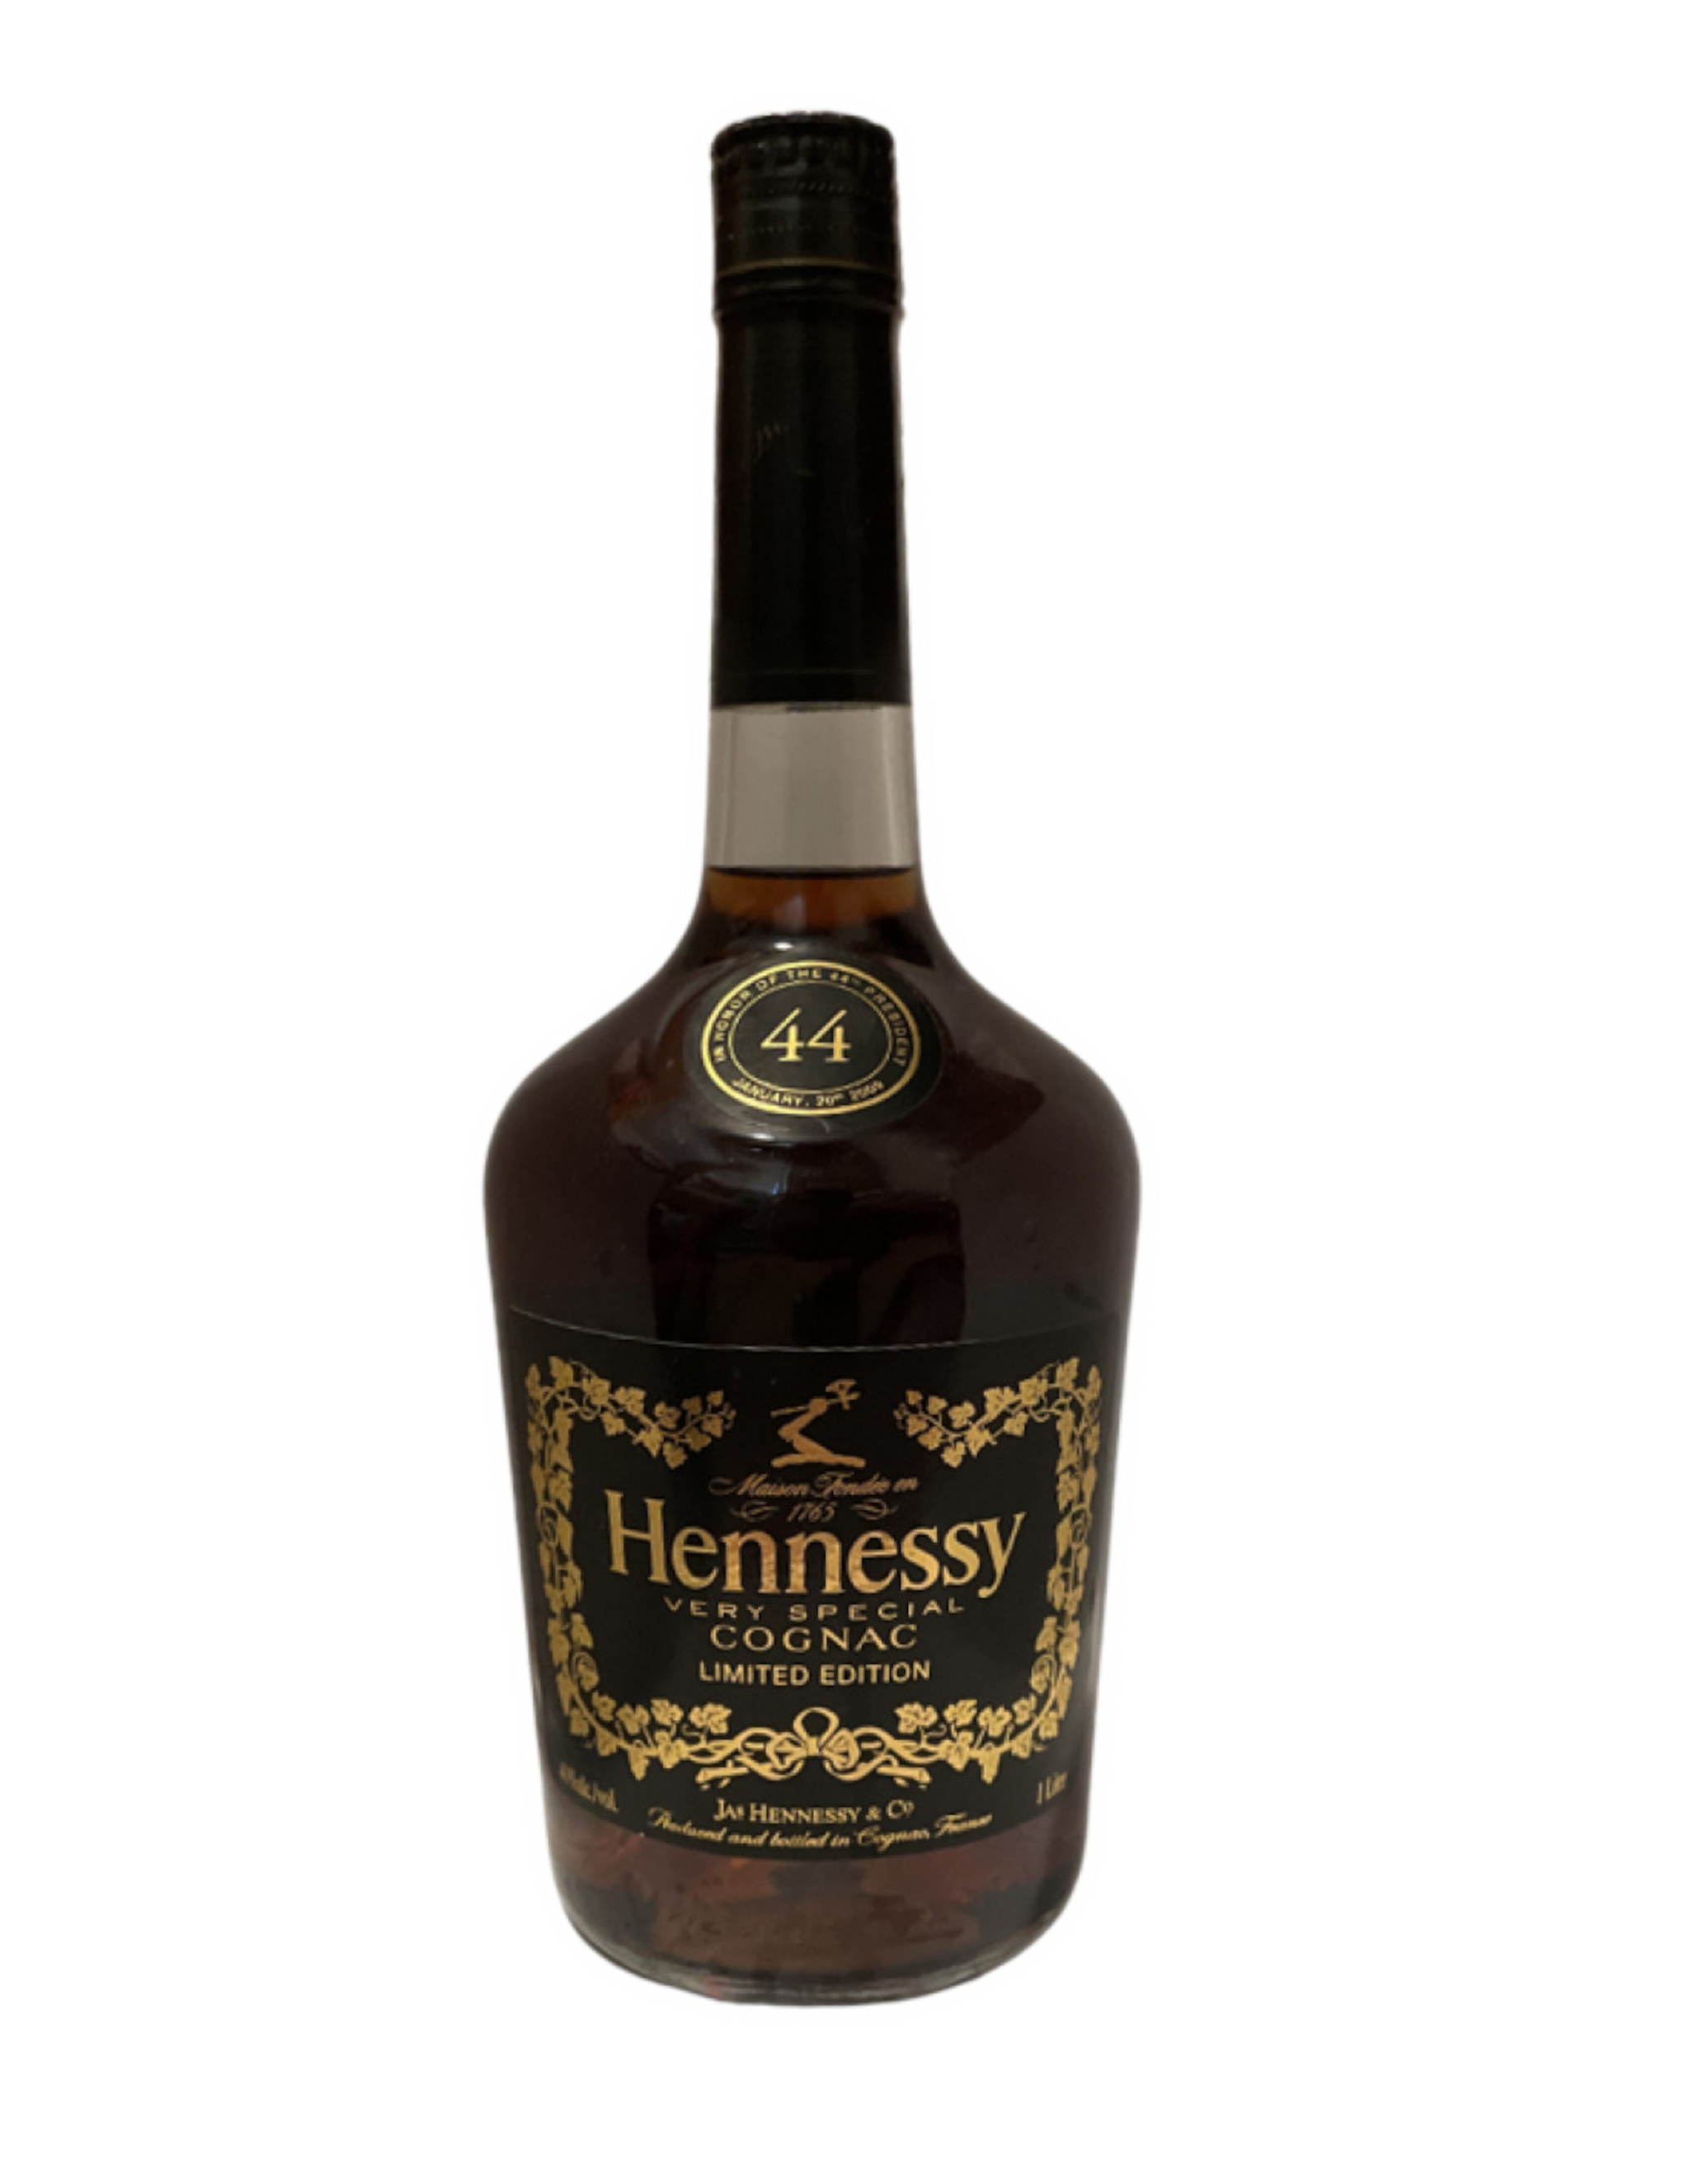 Hennessy In Honor of the 44th President Obama Limited Edition VS Cognac 1Liter